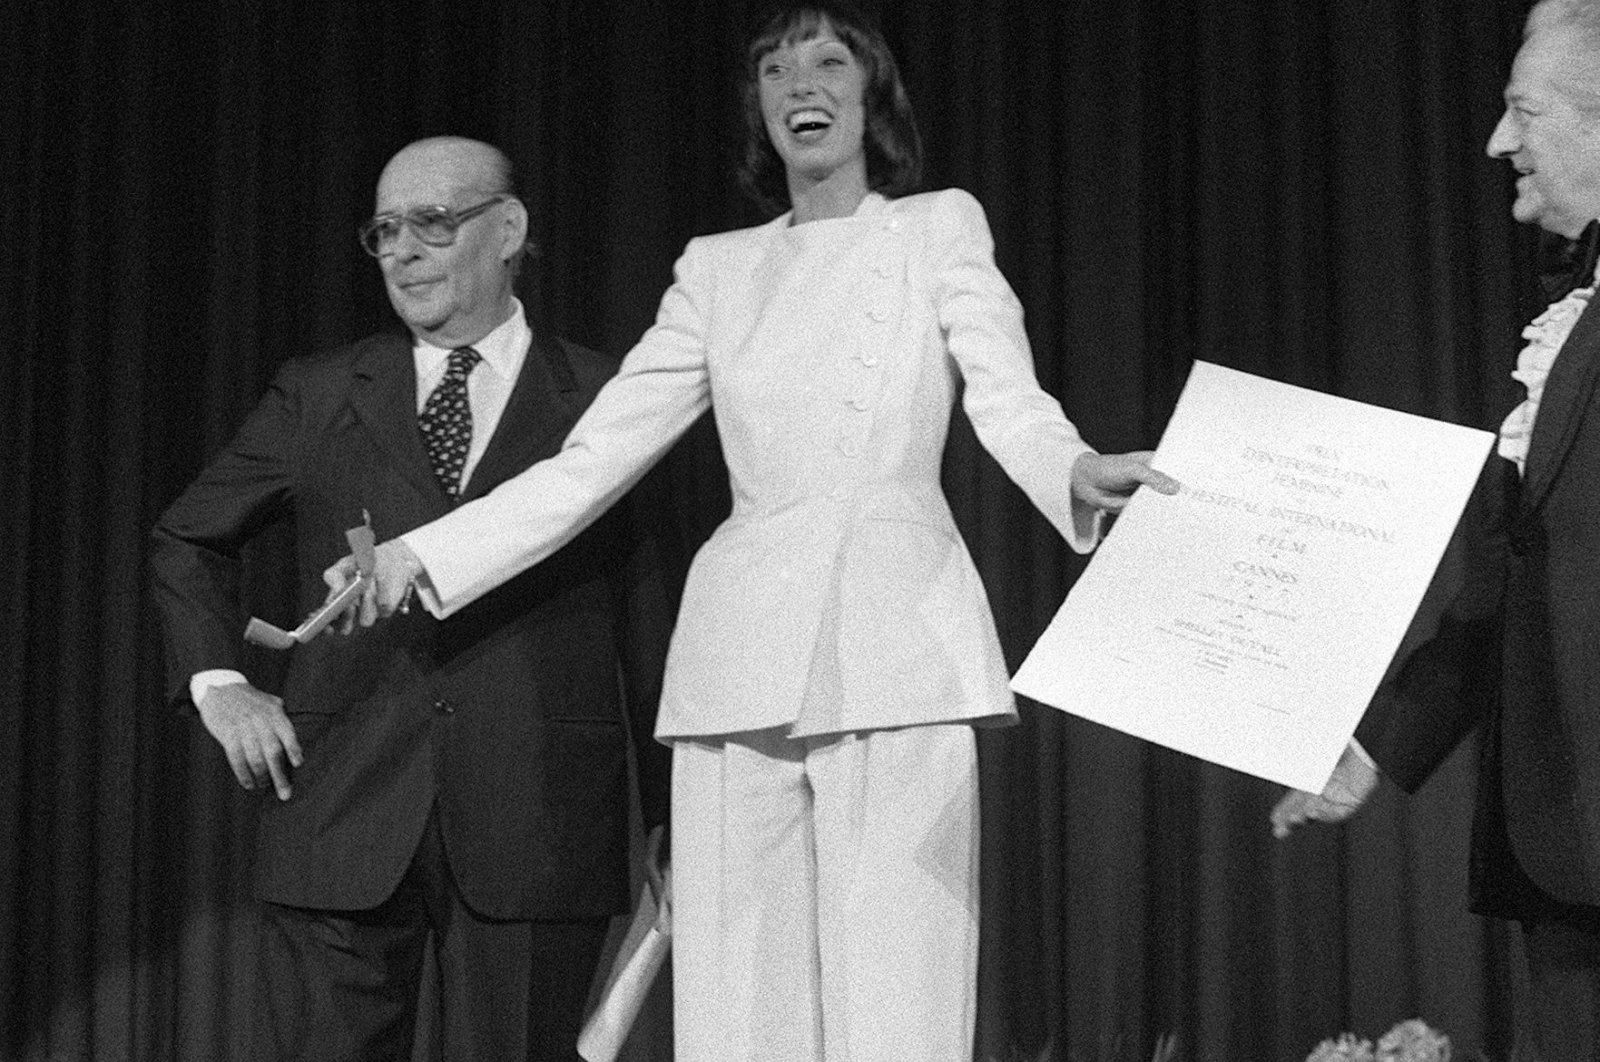 U.S. actor Shelley Duvall (C) receives the best actress award for the film &quot;3 Women&quot; by Robert Altman, during the Cannes International Film Festival, Cannes, France, May 27, 1977. (AFP Photo)